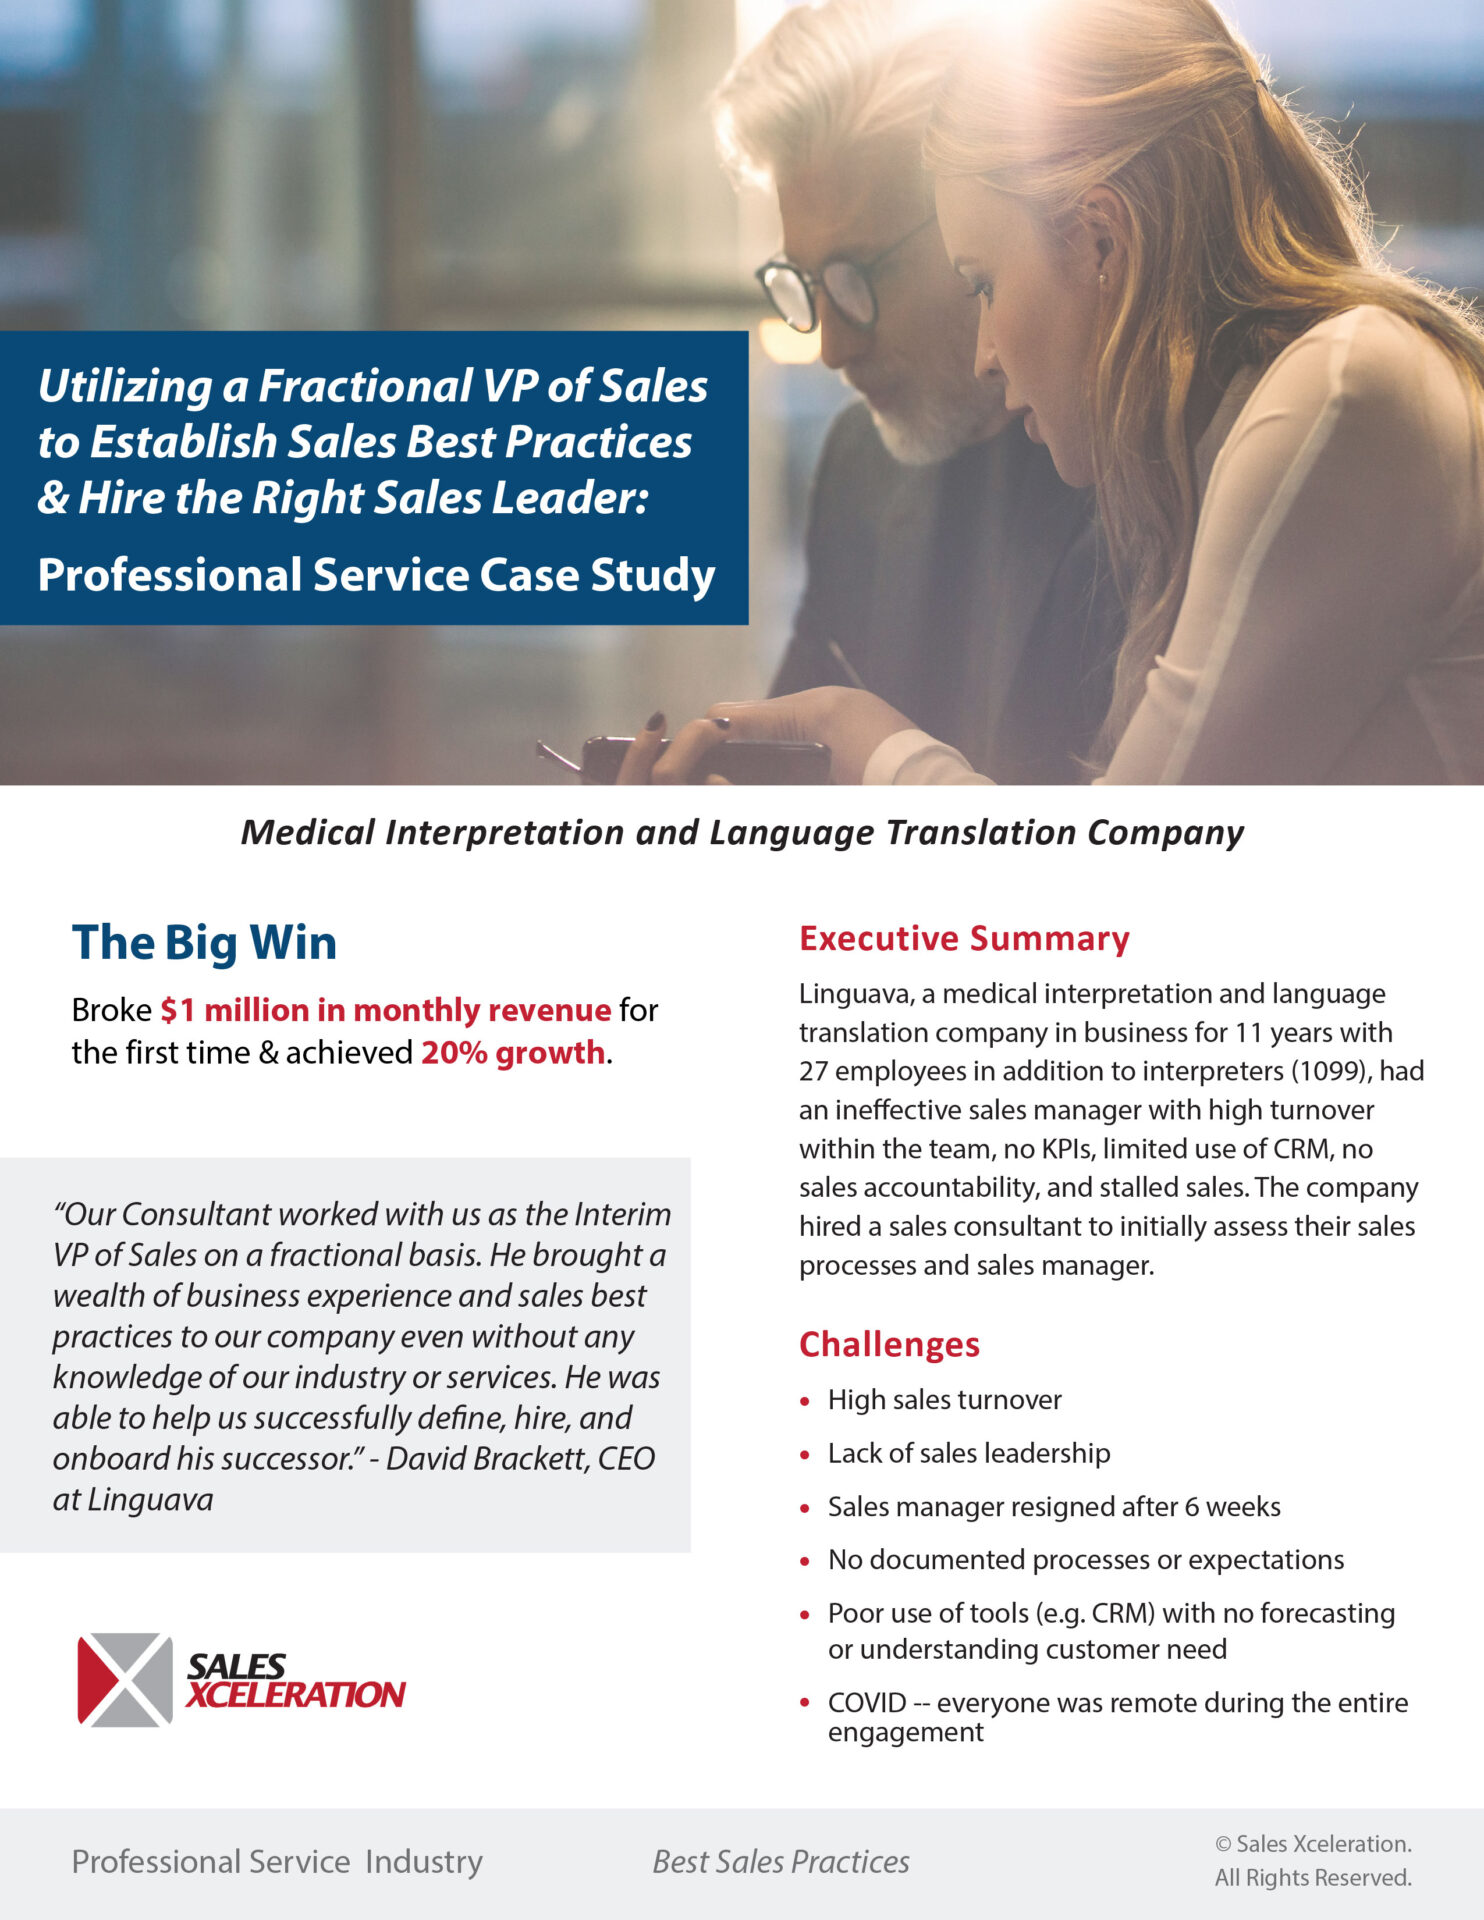 Utilizing a Fractional VP of Sales to Establish Sales Best Practices & Hire the Right Sales Leader